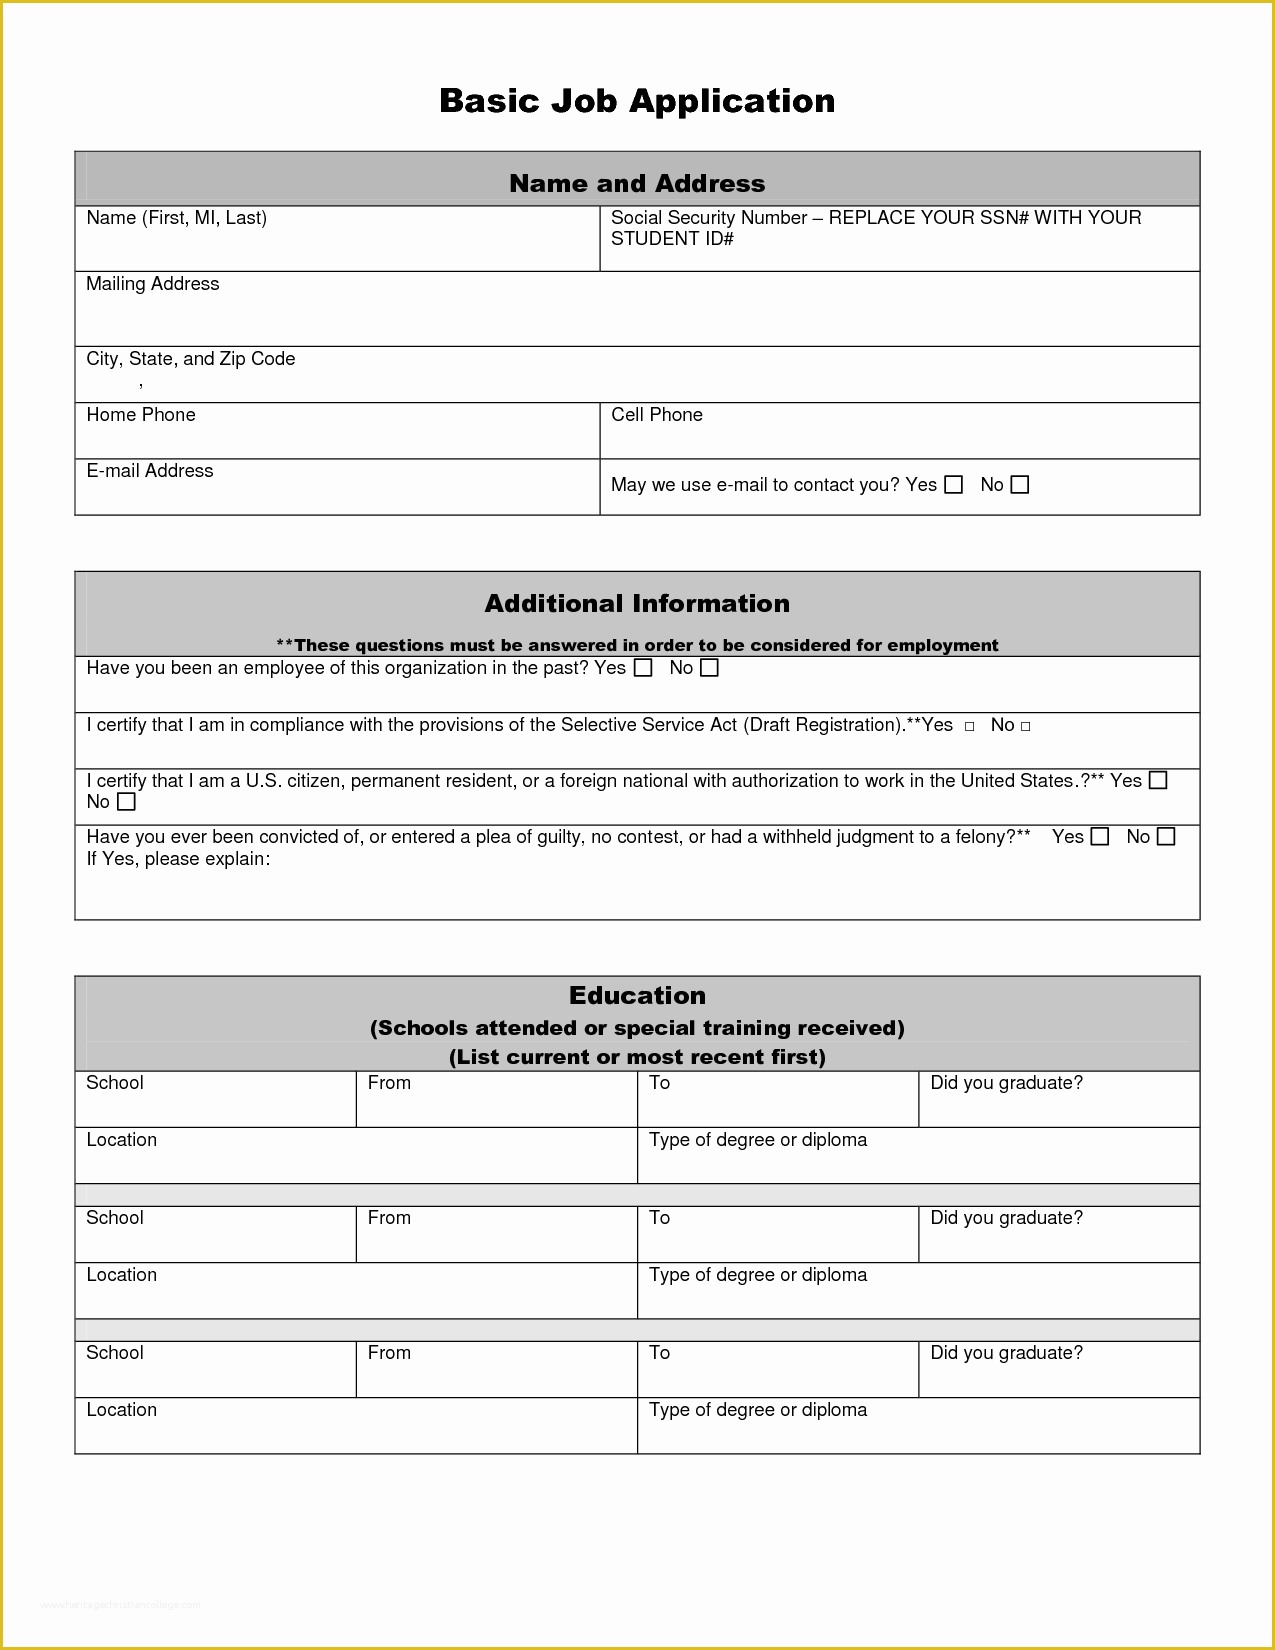 Free Basic Job Application Template Of Best S Of Basic Job Application Template Basic Job